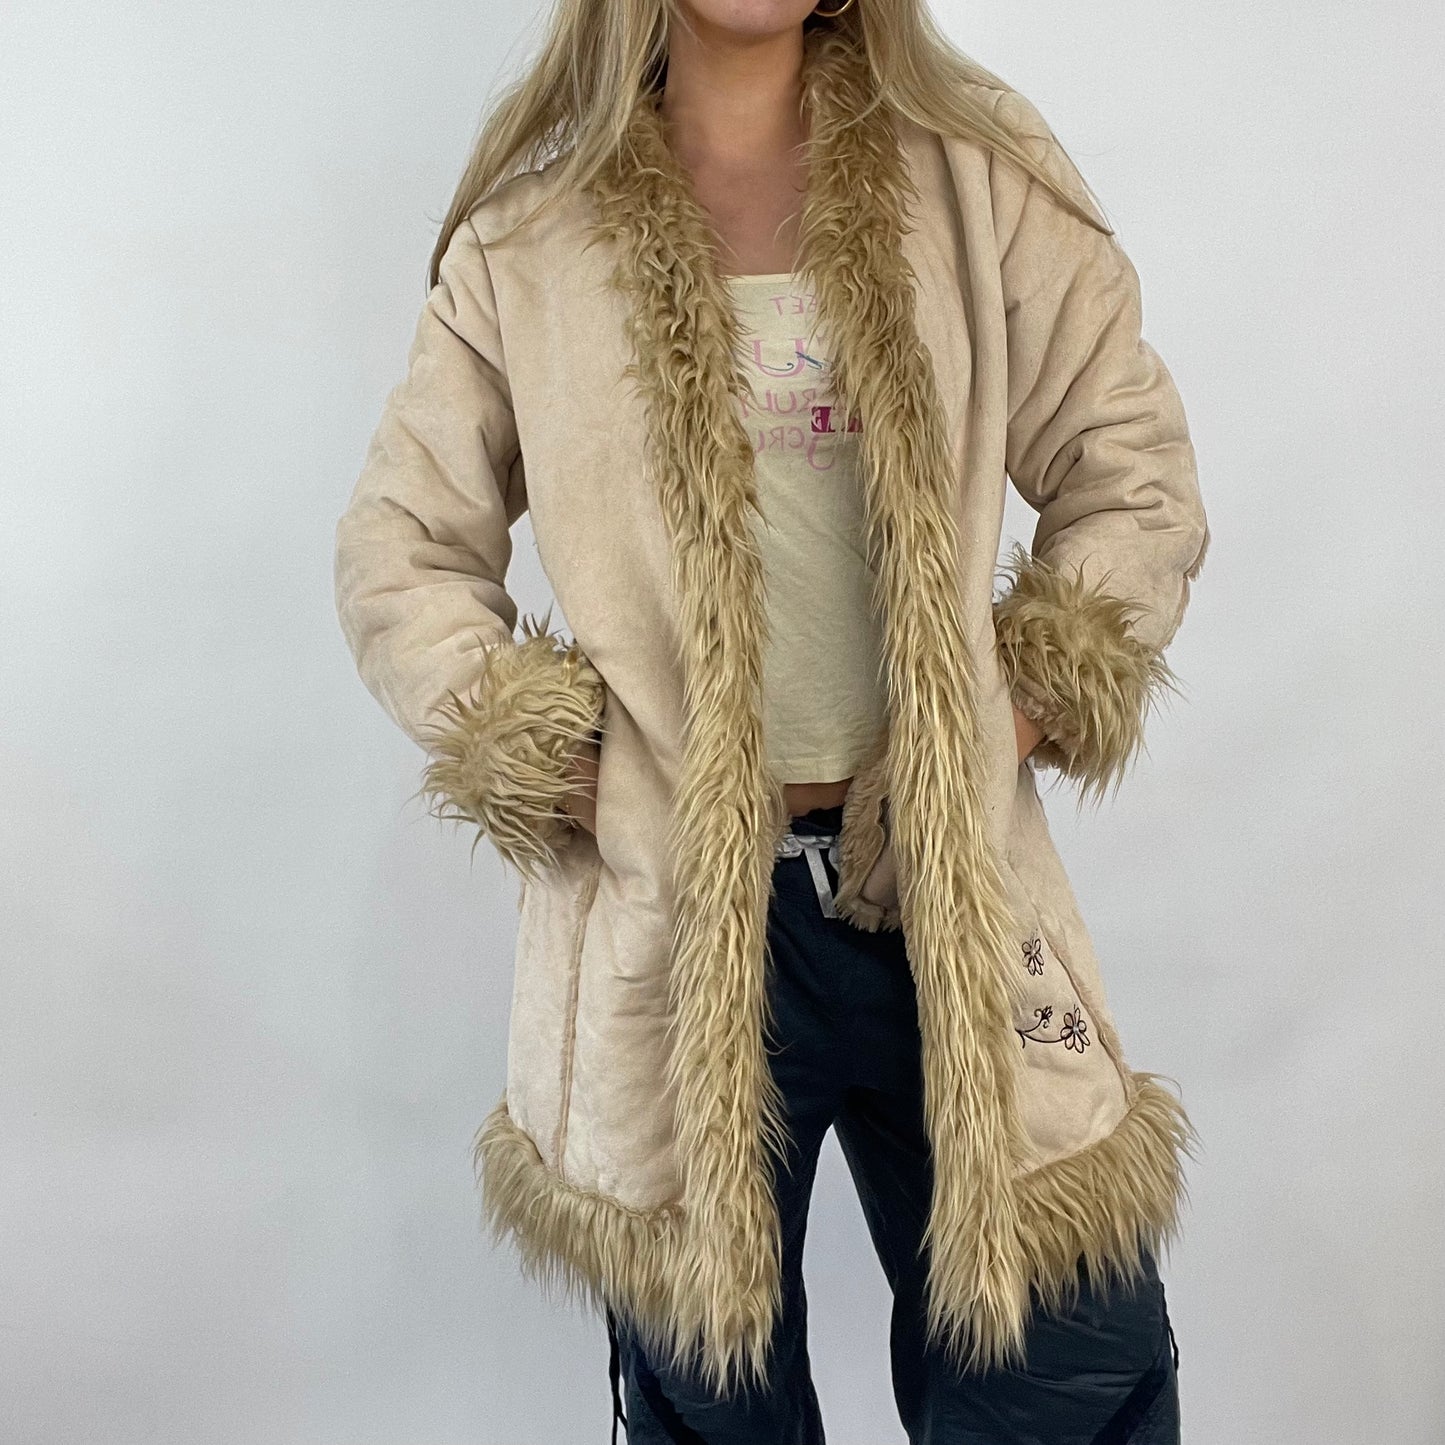 GIRL CORE DROP | small beige pimkie longline afghan style coat with floral embroidery